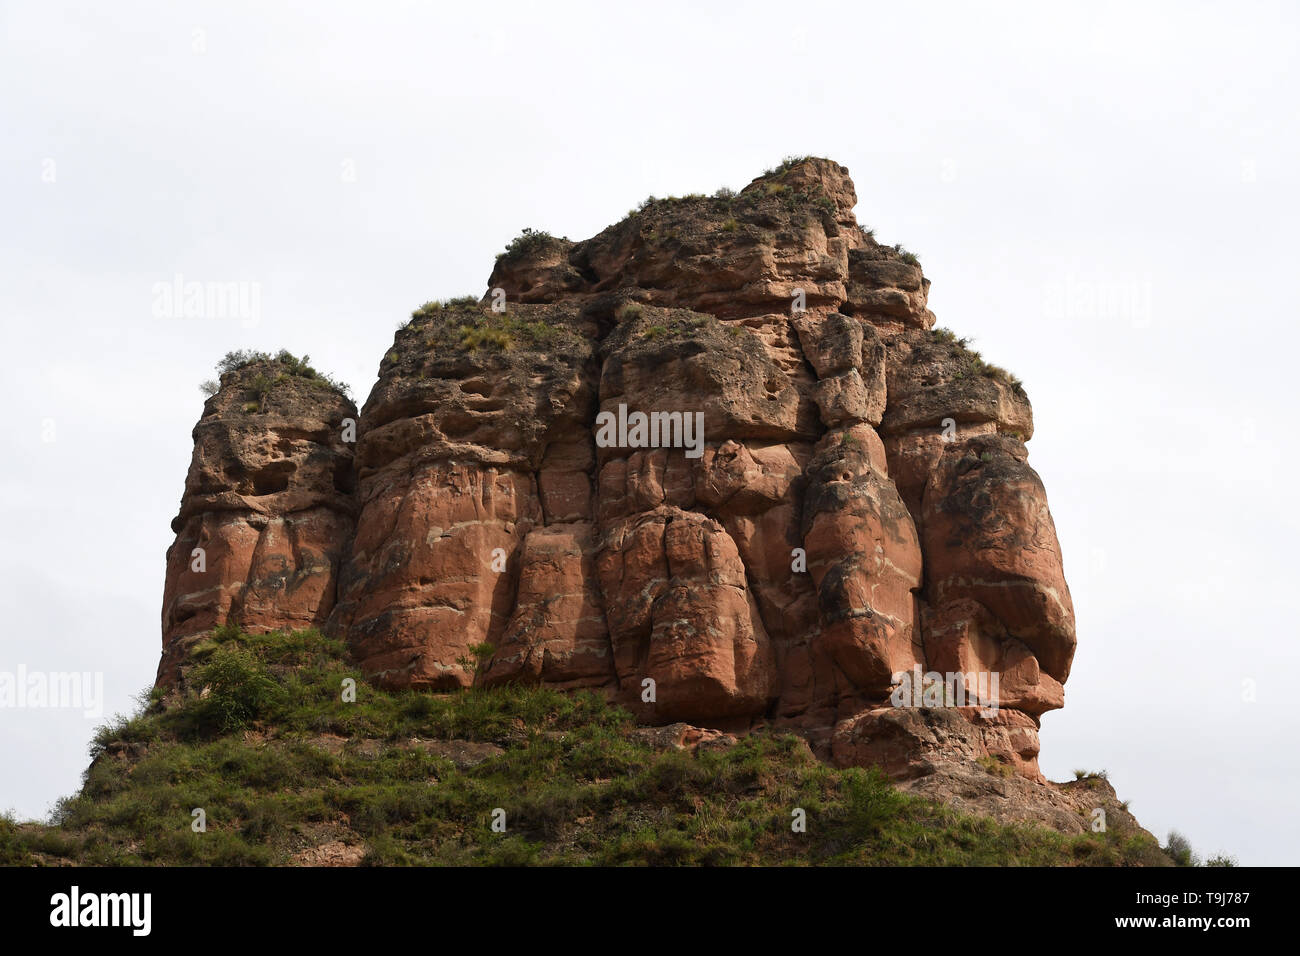 Yongjing. 18th May, 2019. Photo taken on May 18, 2019 shows a stone forest at Bingling Danxia National Geological Park in Yongjing County, northwest China's Gansu Province. Danxia landform is a unique type of landscapes formed from red sandstone and characterized by steep cliffs. Credit: Fan Peishen/Xinhua/Alamy Live News Stock Photo